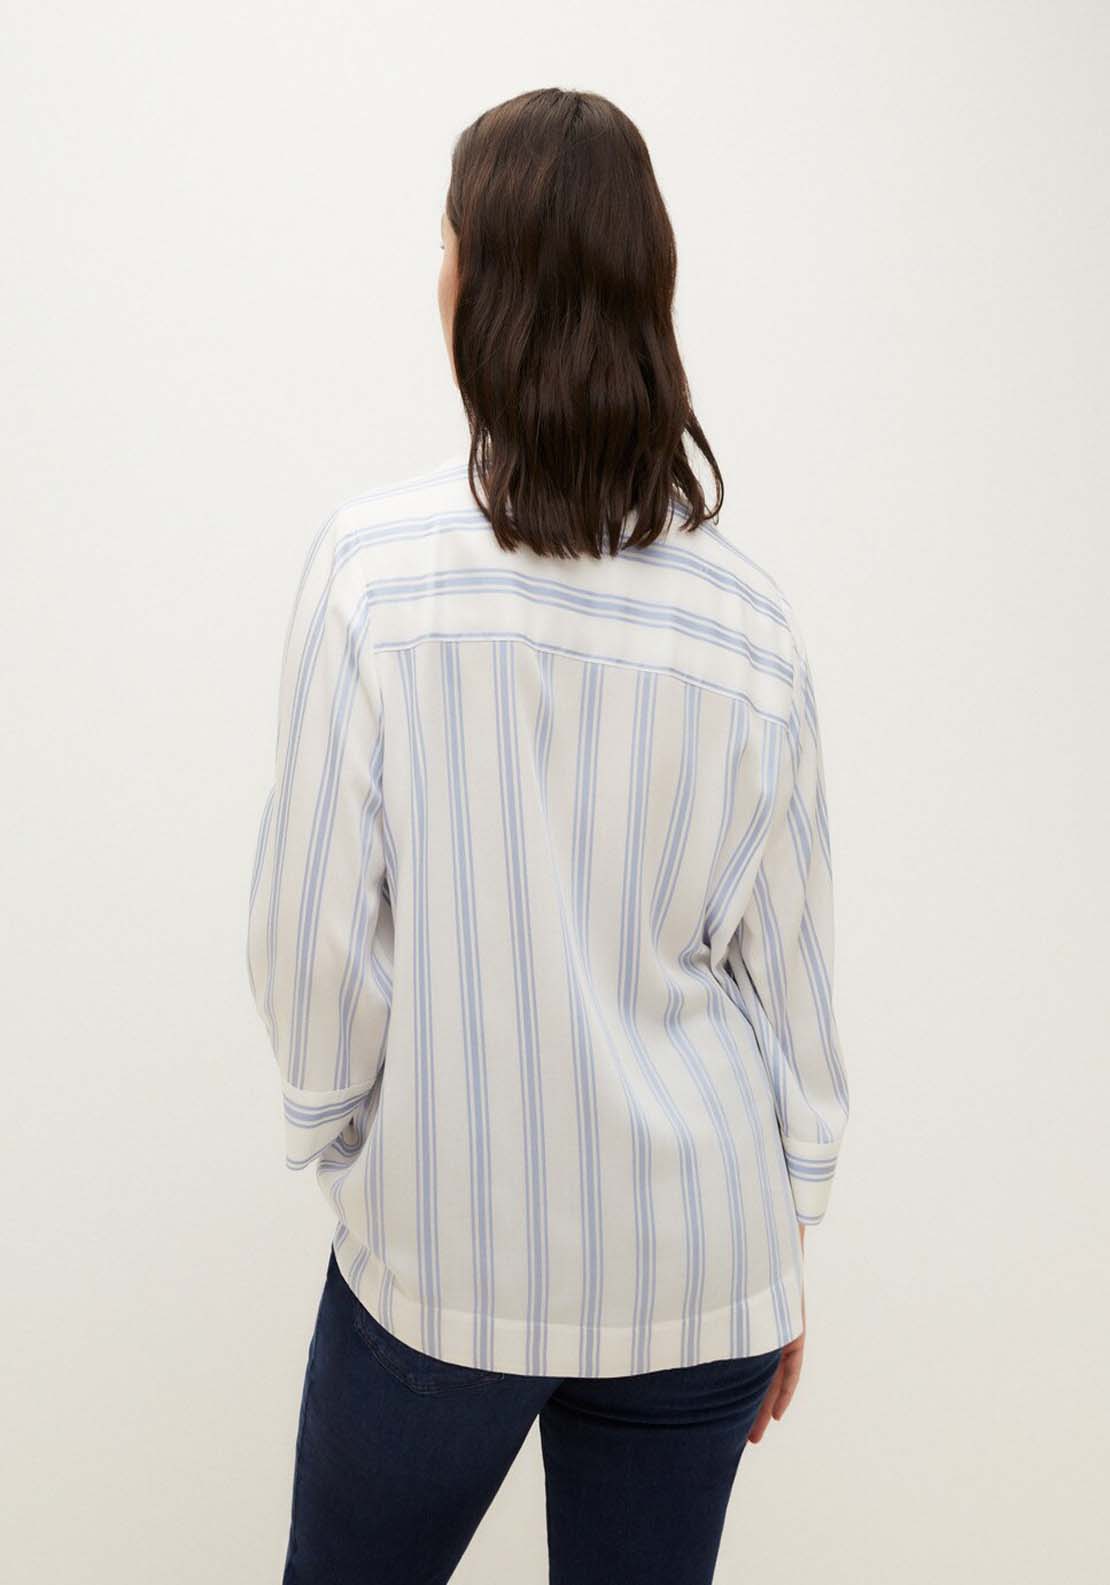 Couchel Stripes Long Sleeve Blouse 3 Shaws Department Stores